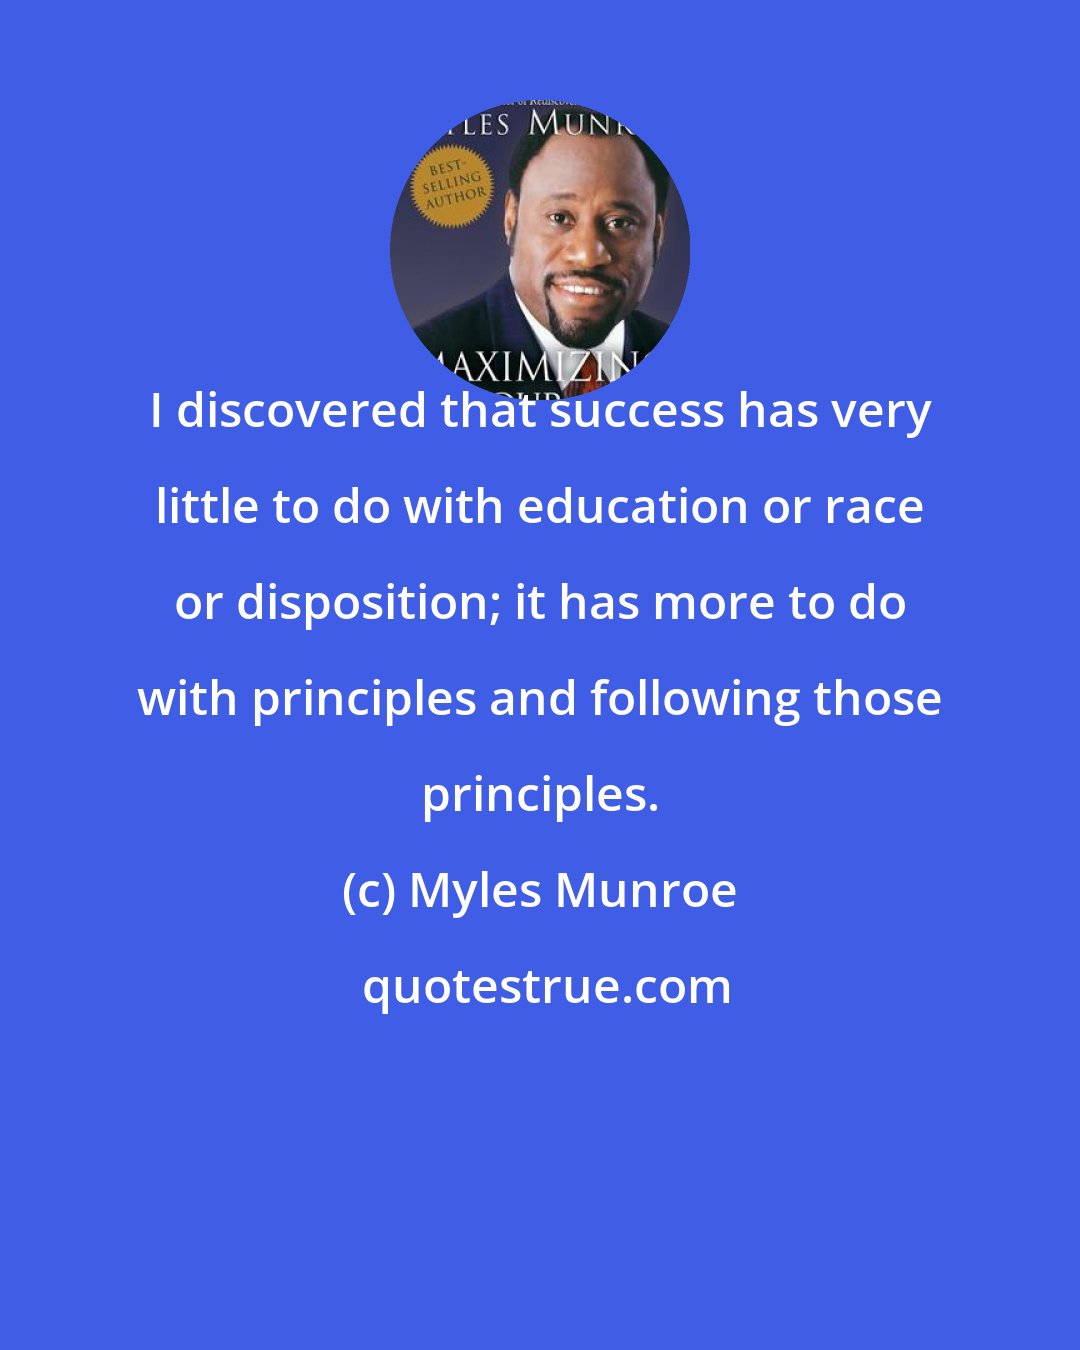 Myles Munroe: I discovered that success has very little to do with education or race or disposition; it has more to do with principles and following those principles.